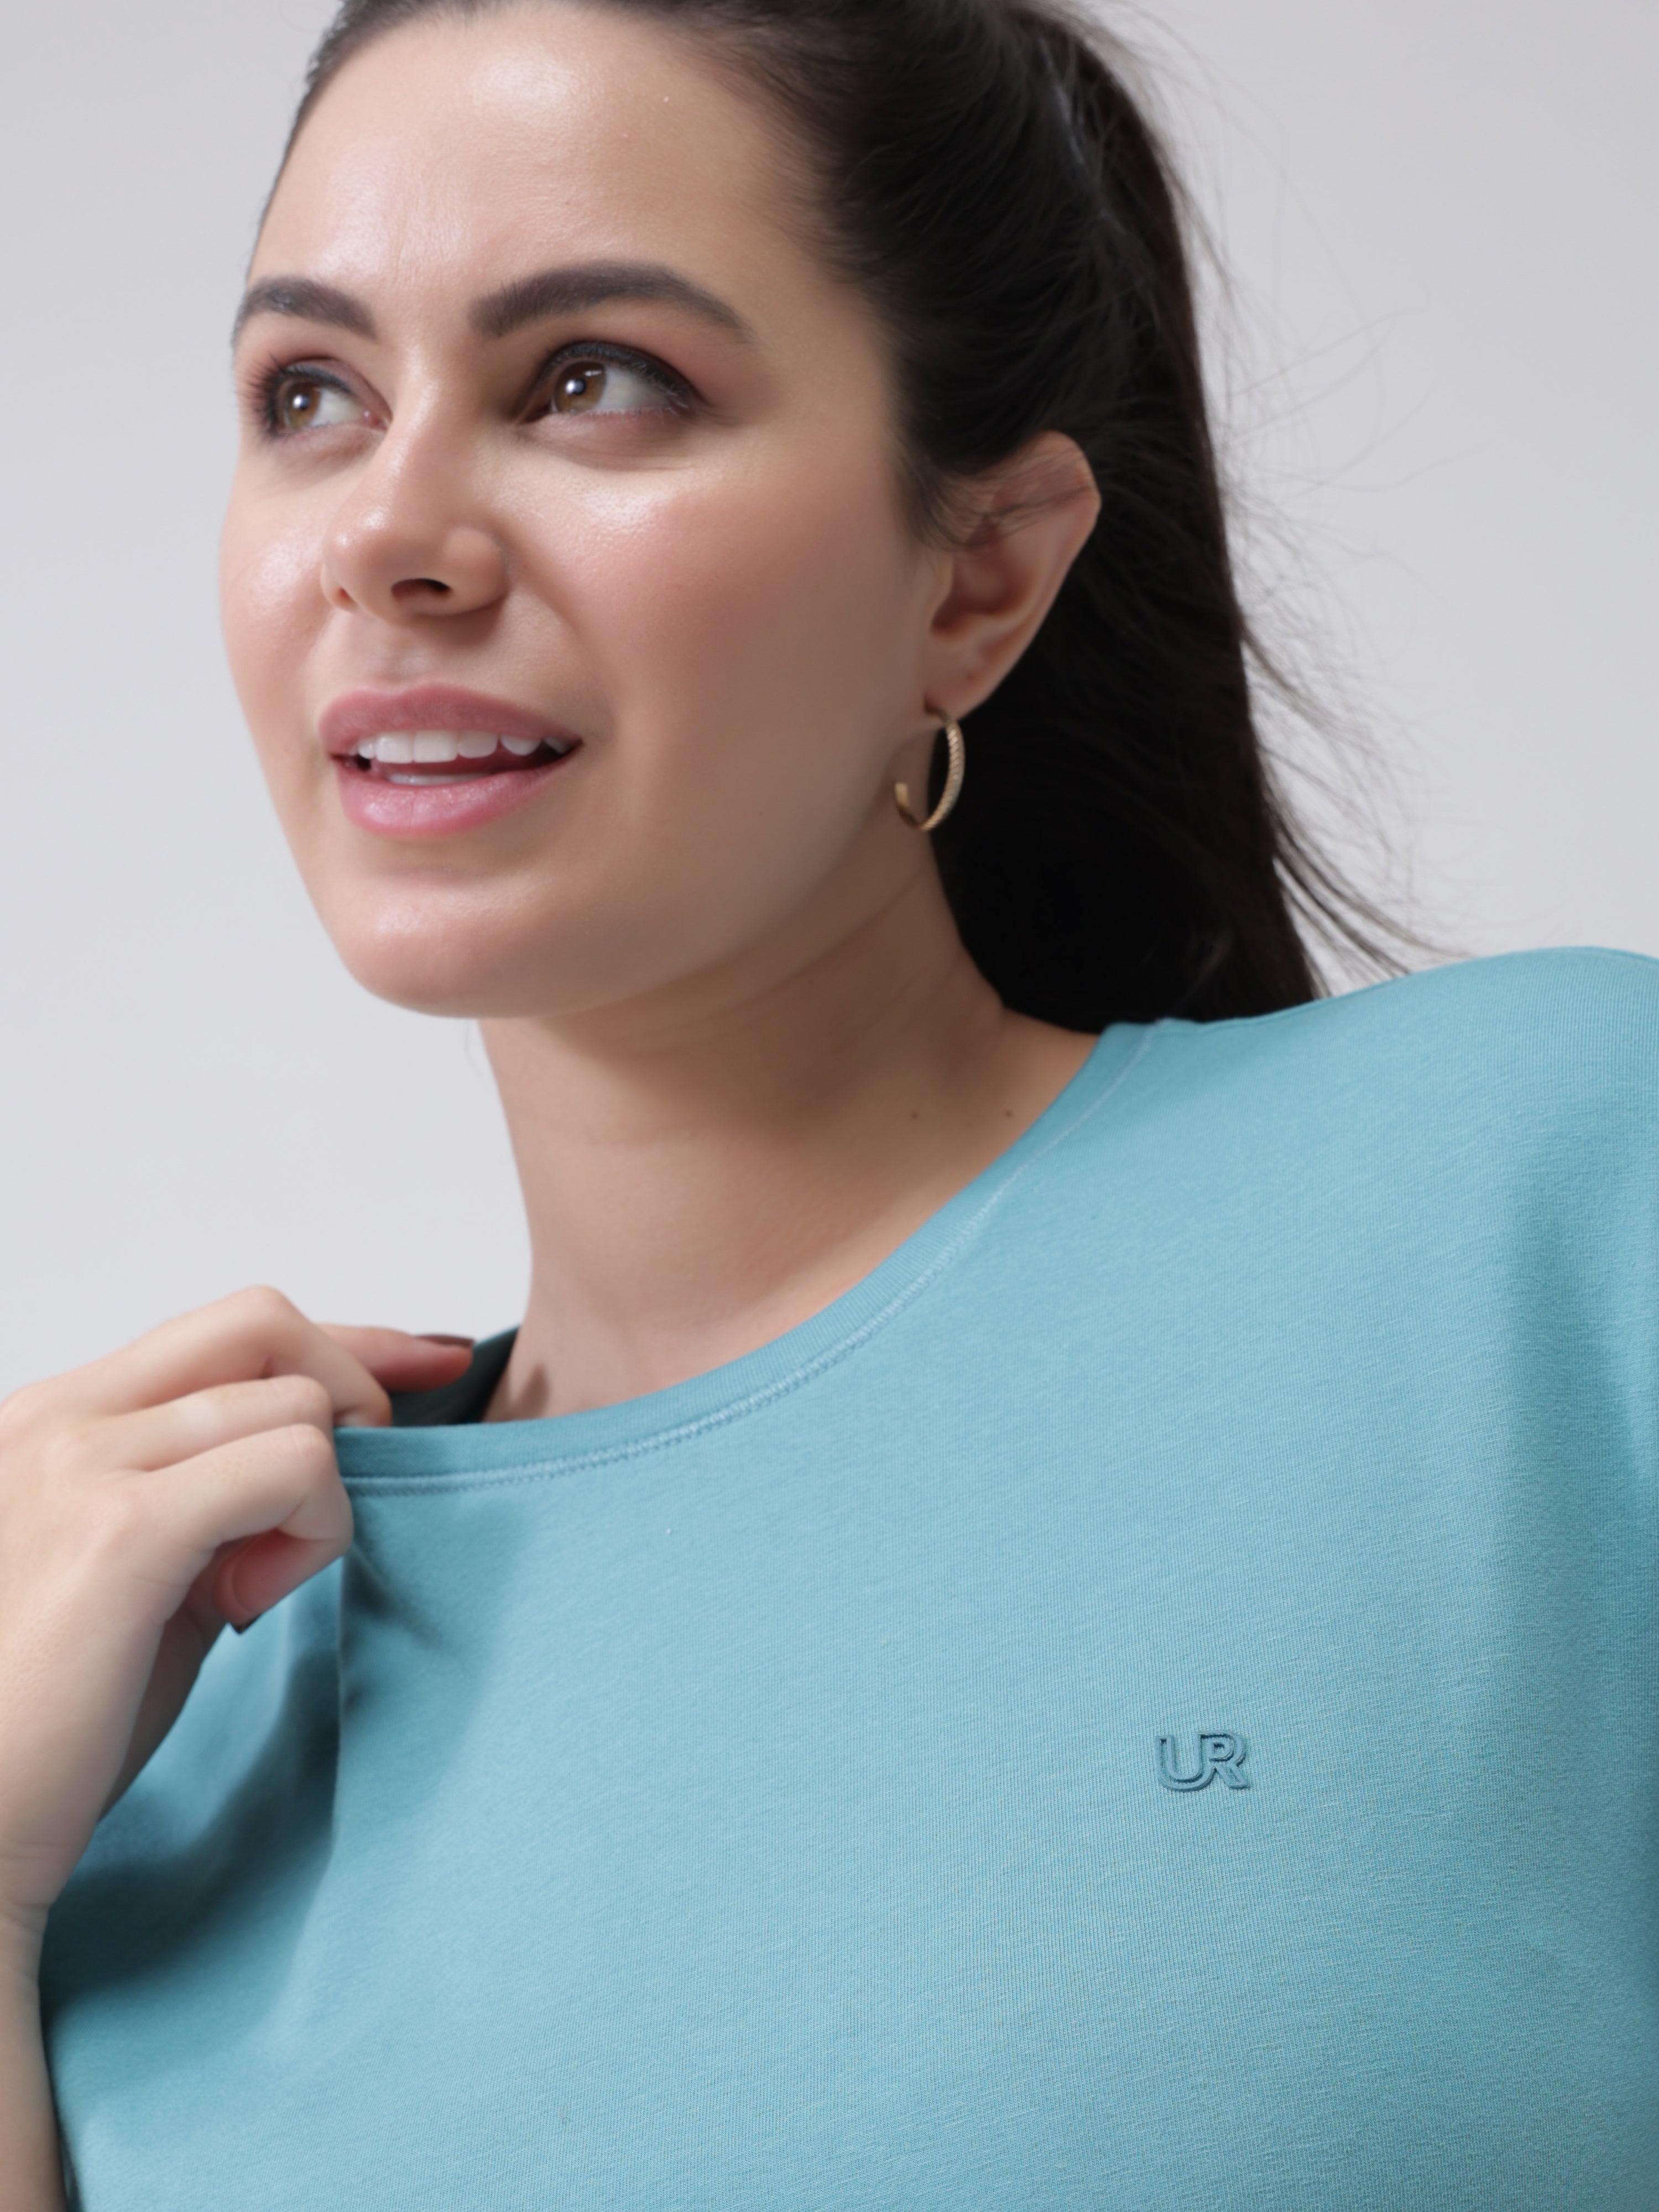 Woman wearing a turquoise round-neck Turms T-shirt with a small logo on the chest, showcasing stylish and comfortable casualwear.